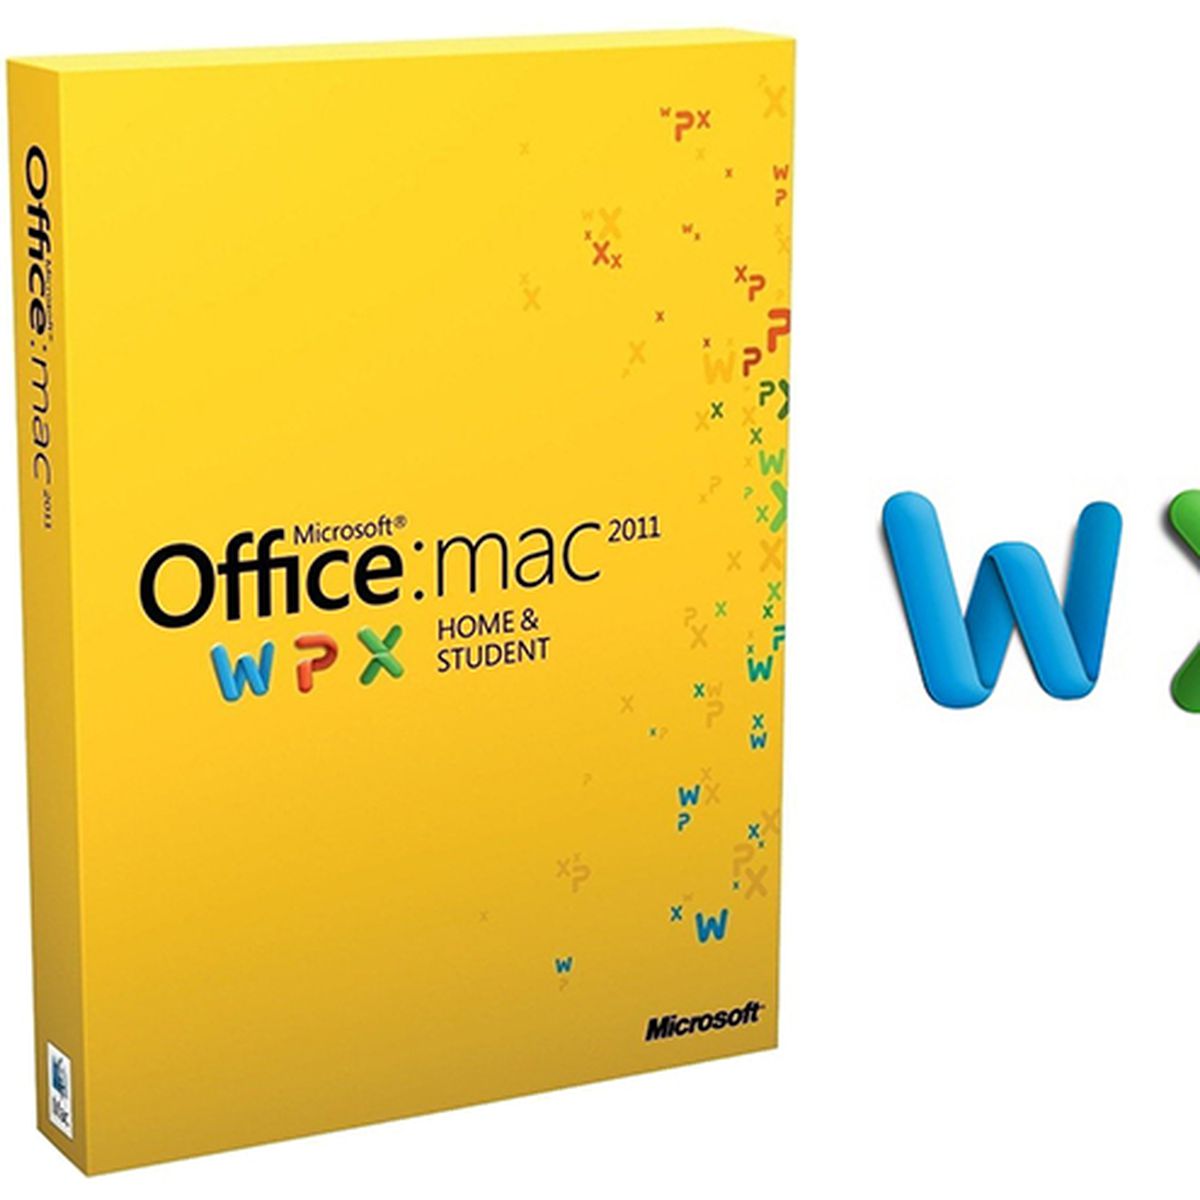 Microsoft Office 2009 Free Download For Mac